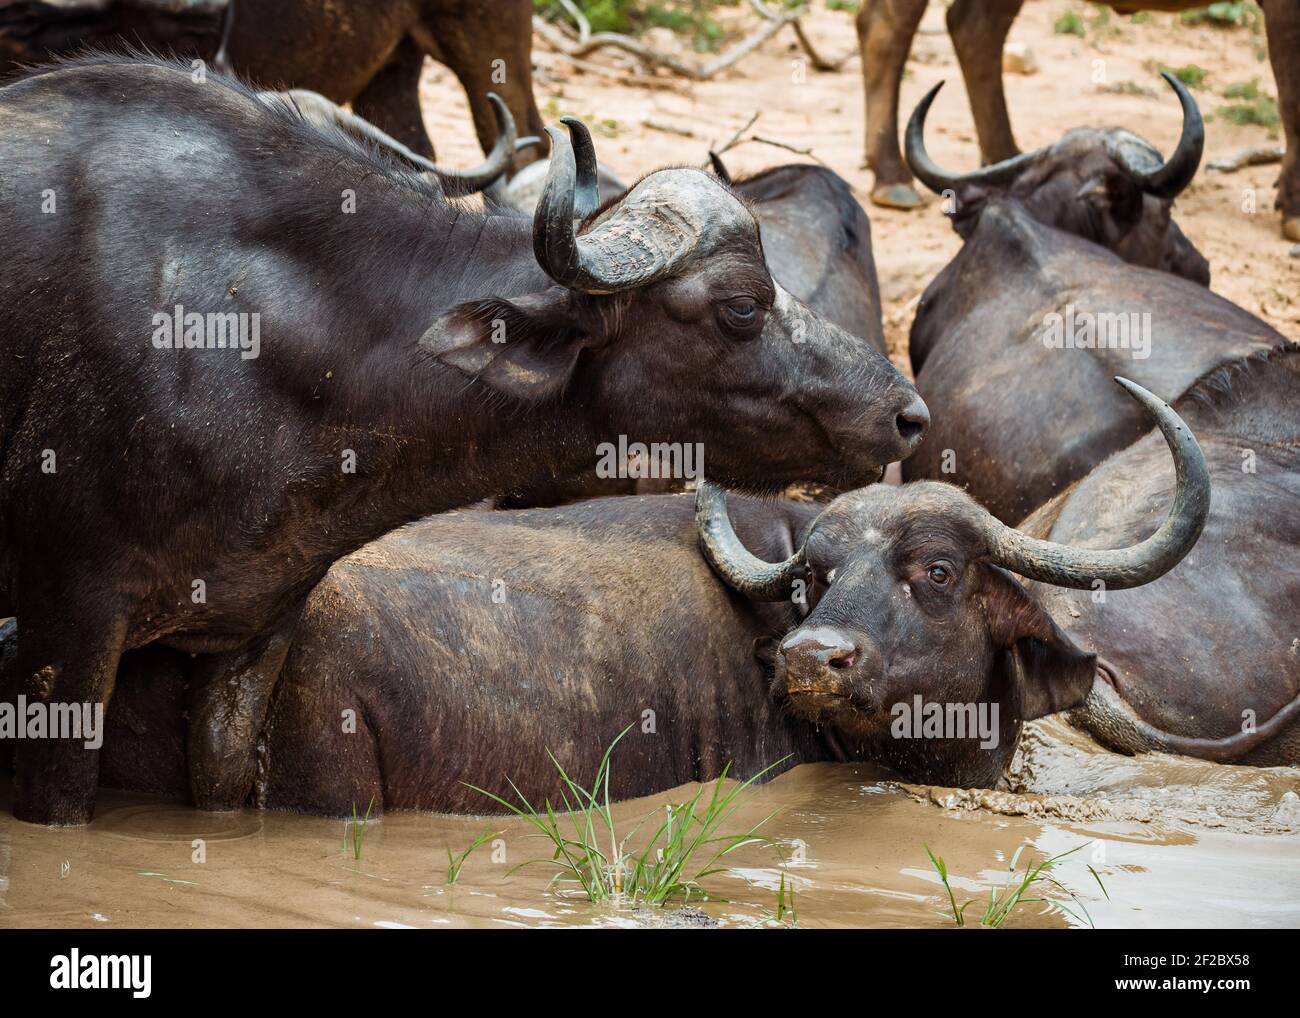 Buffalo High Resolution Stock Photography and Images - Alamy